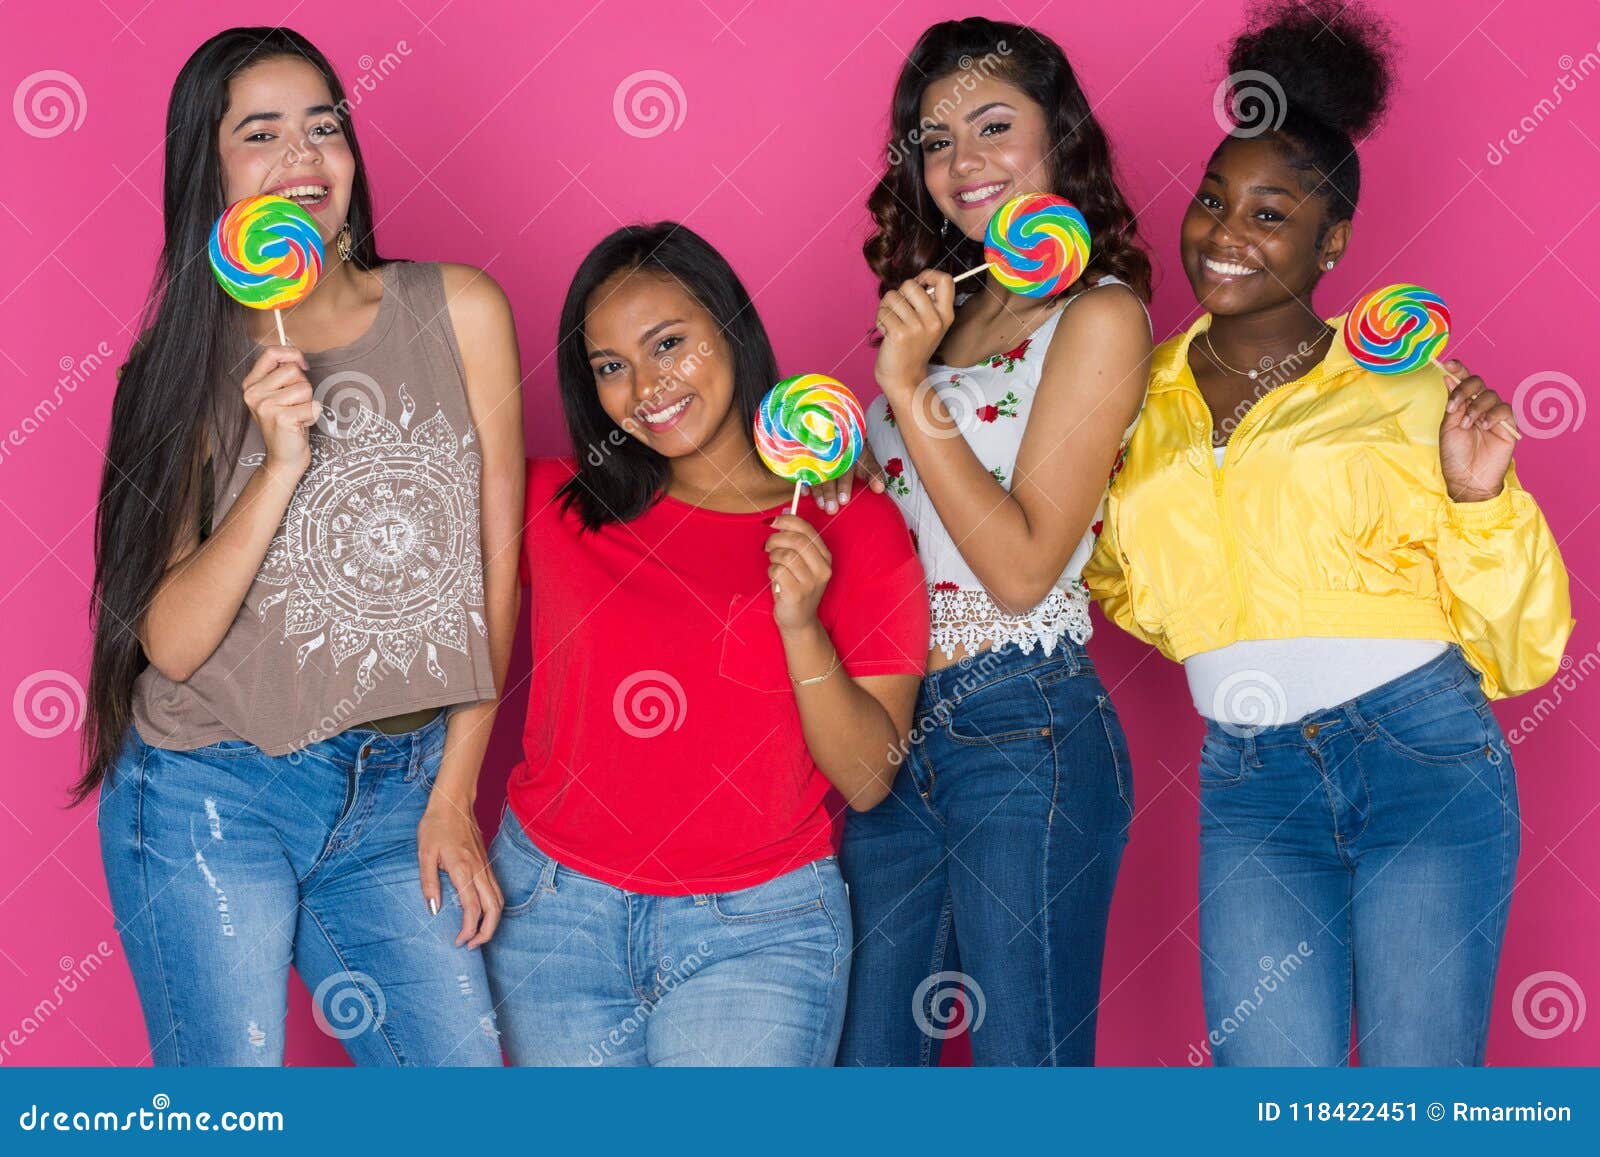 Excited young teen girls